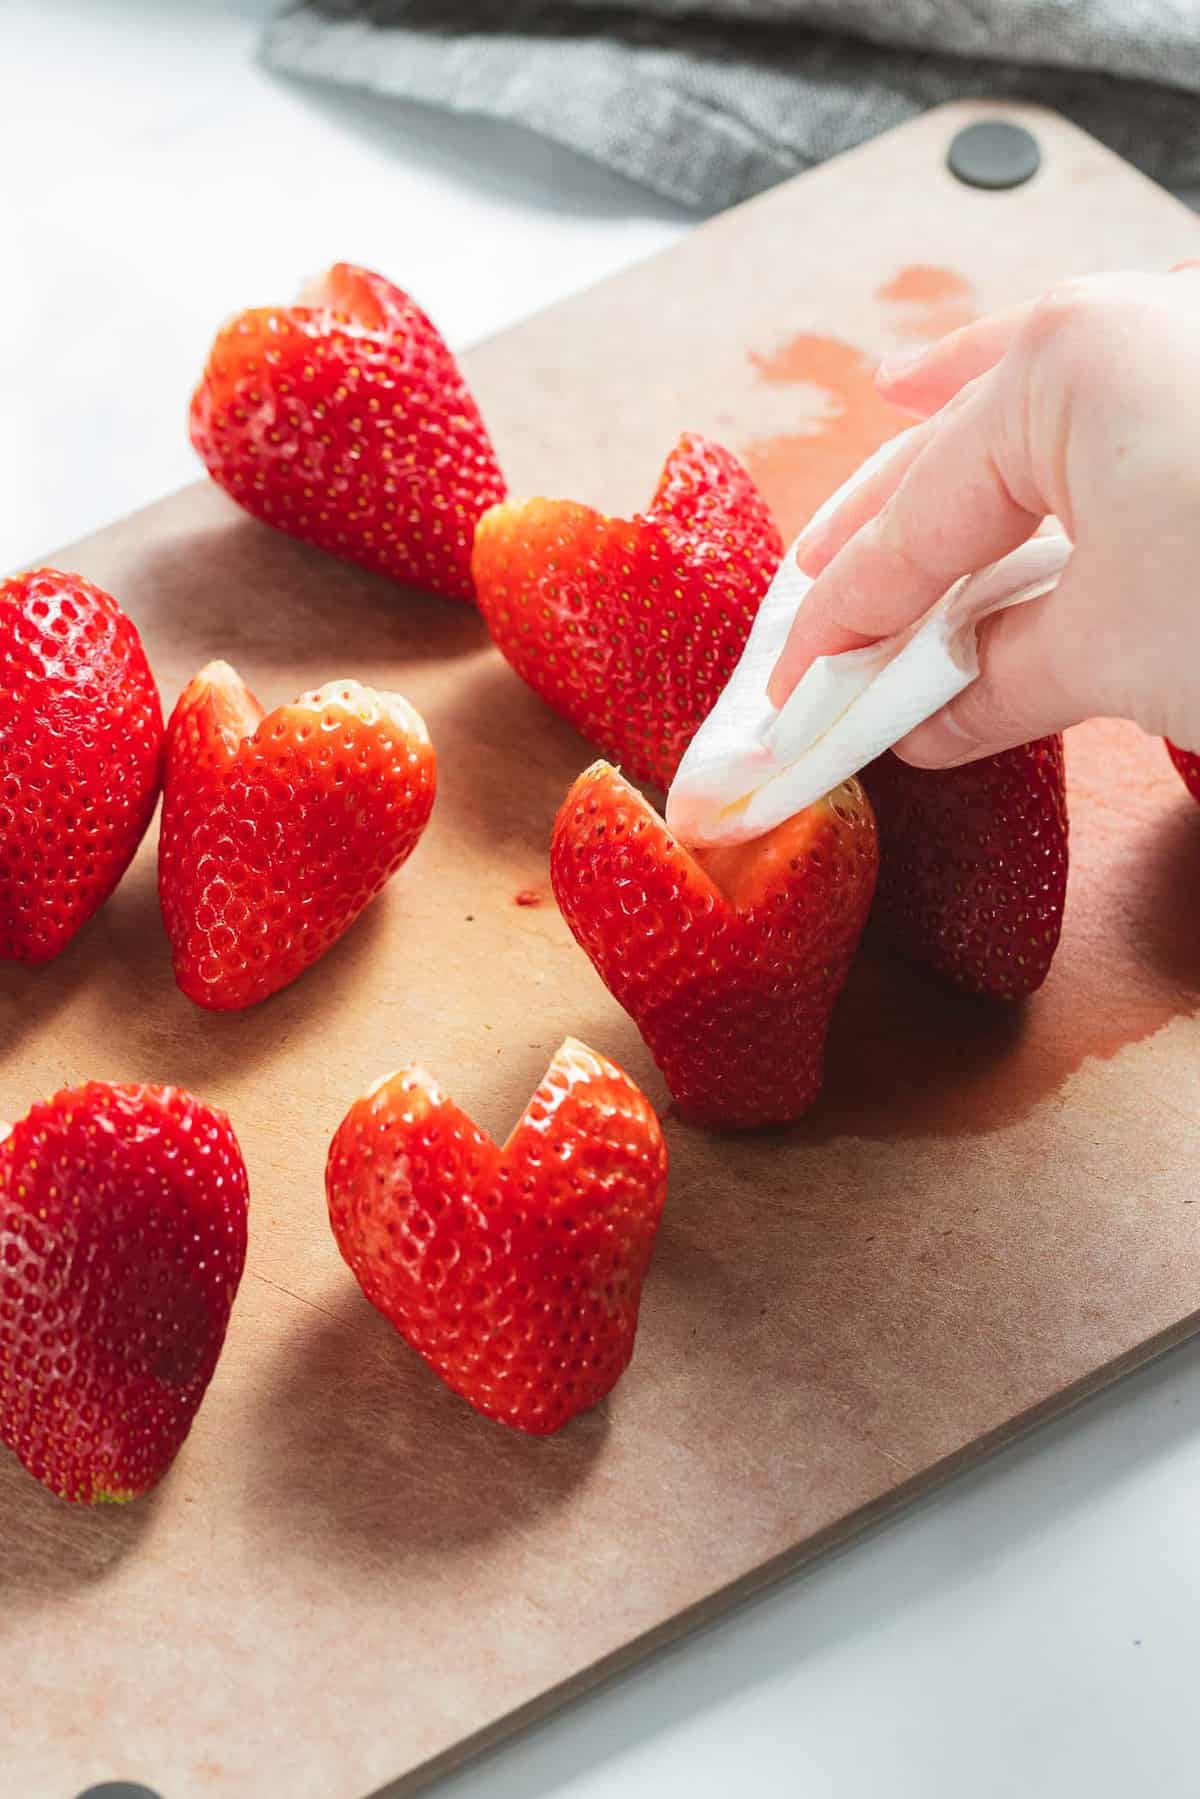 Heart shaped strawberries patted dry with paper towel.